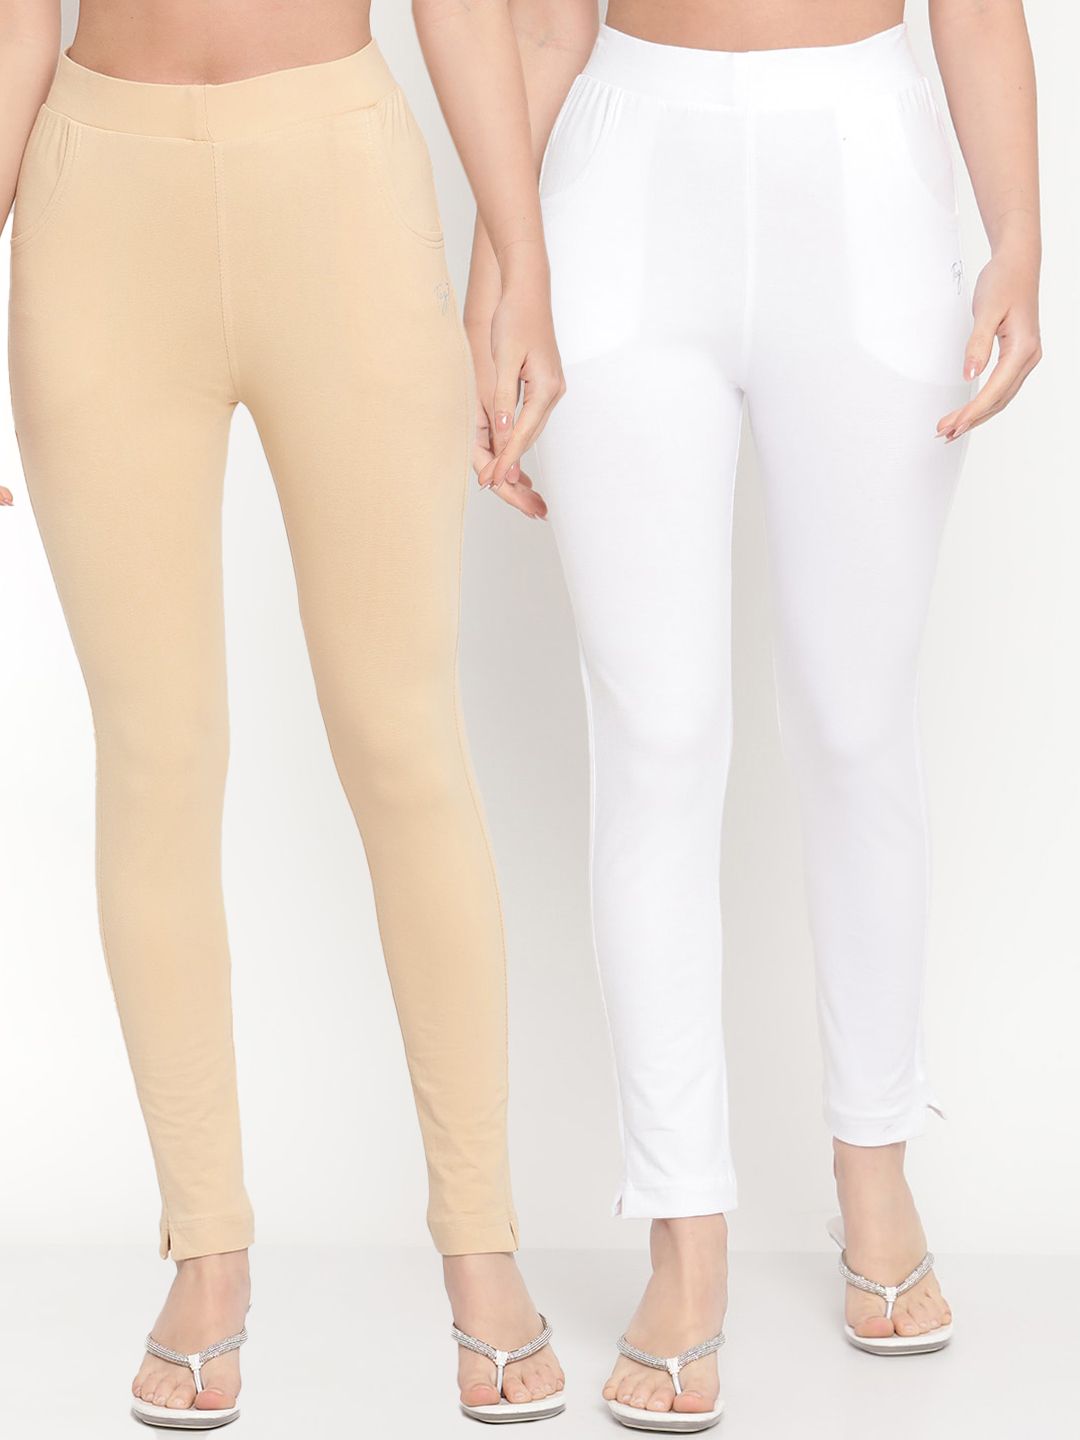 TAG 7 Set Of 2 Beige & White Solid Leggings Price in India